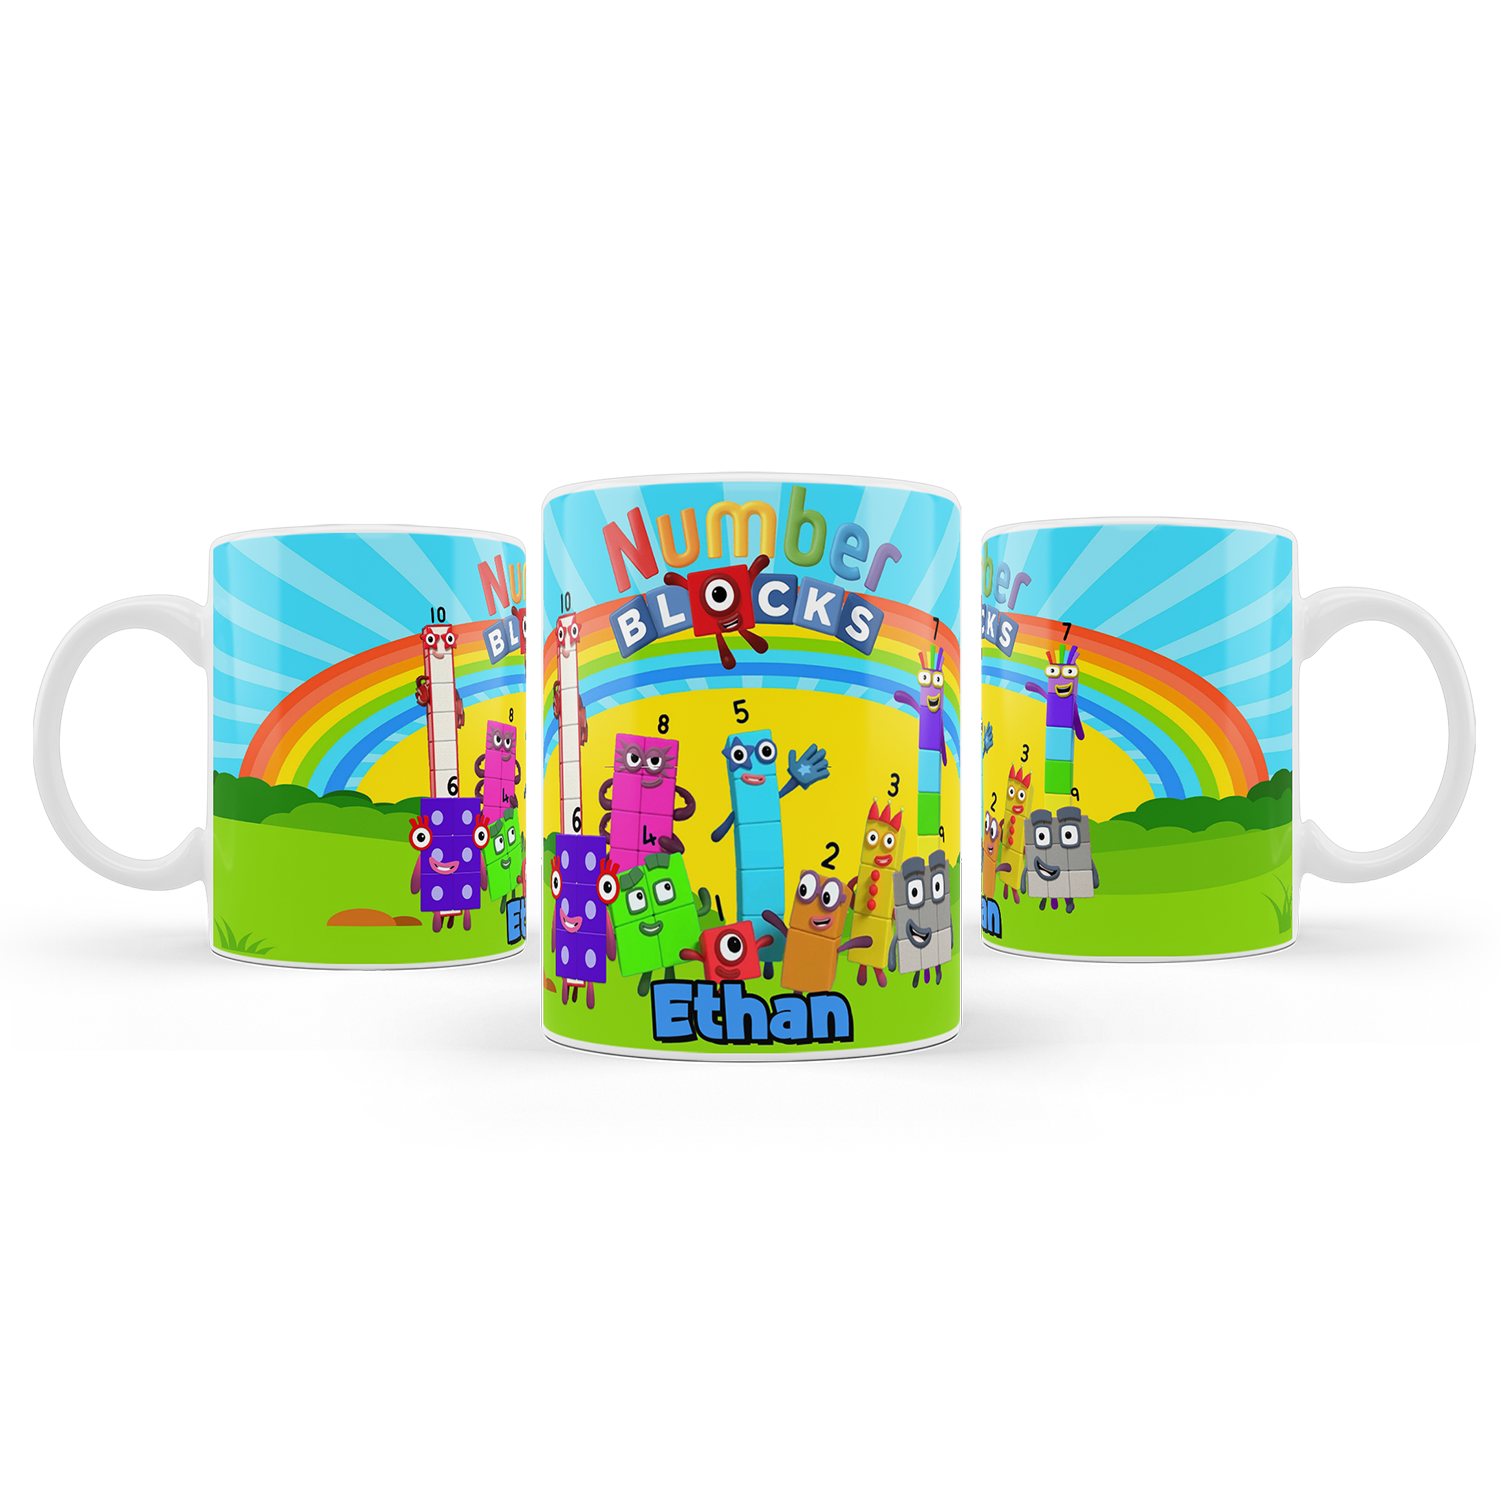 Personalized Sublimation Mugs with NumberBlocks Design